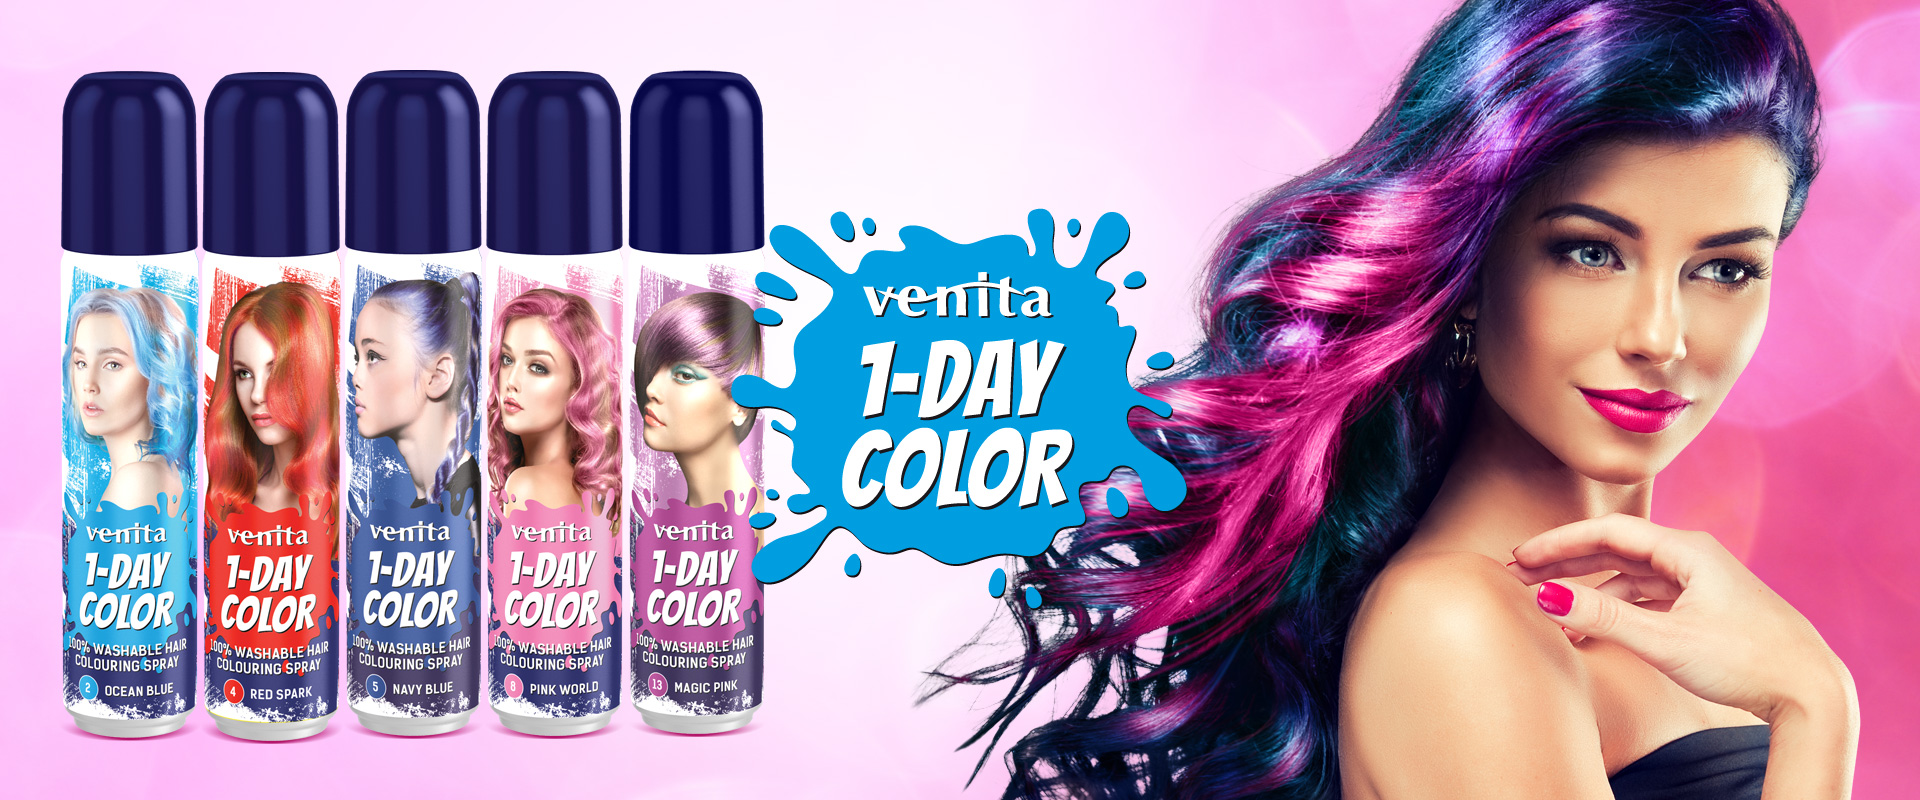 There is a young woman with colorful long hair and one day colour hair sprays